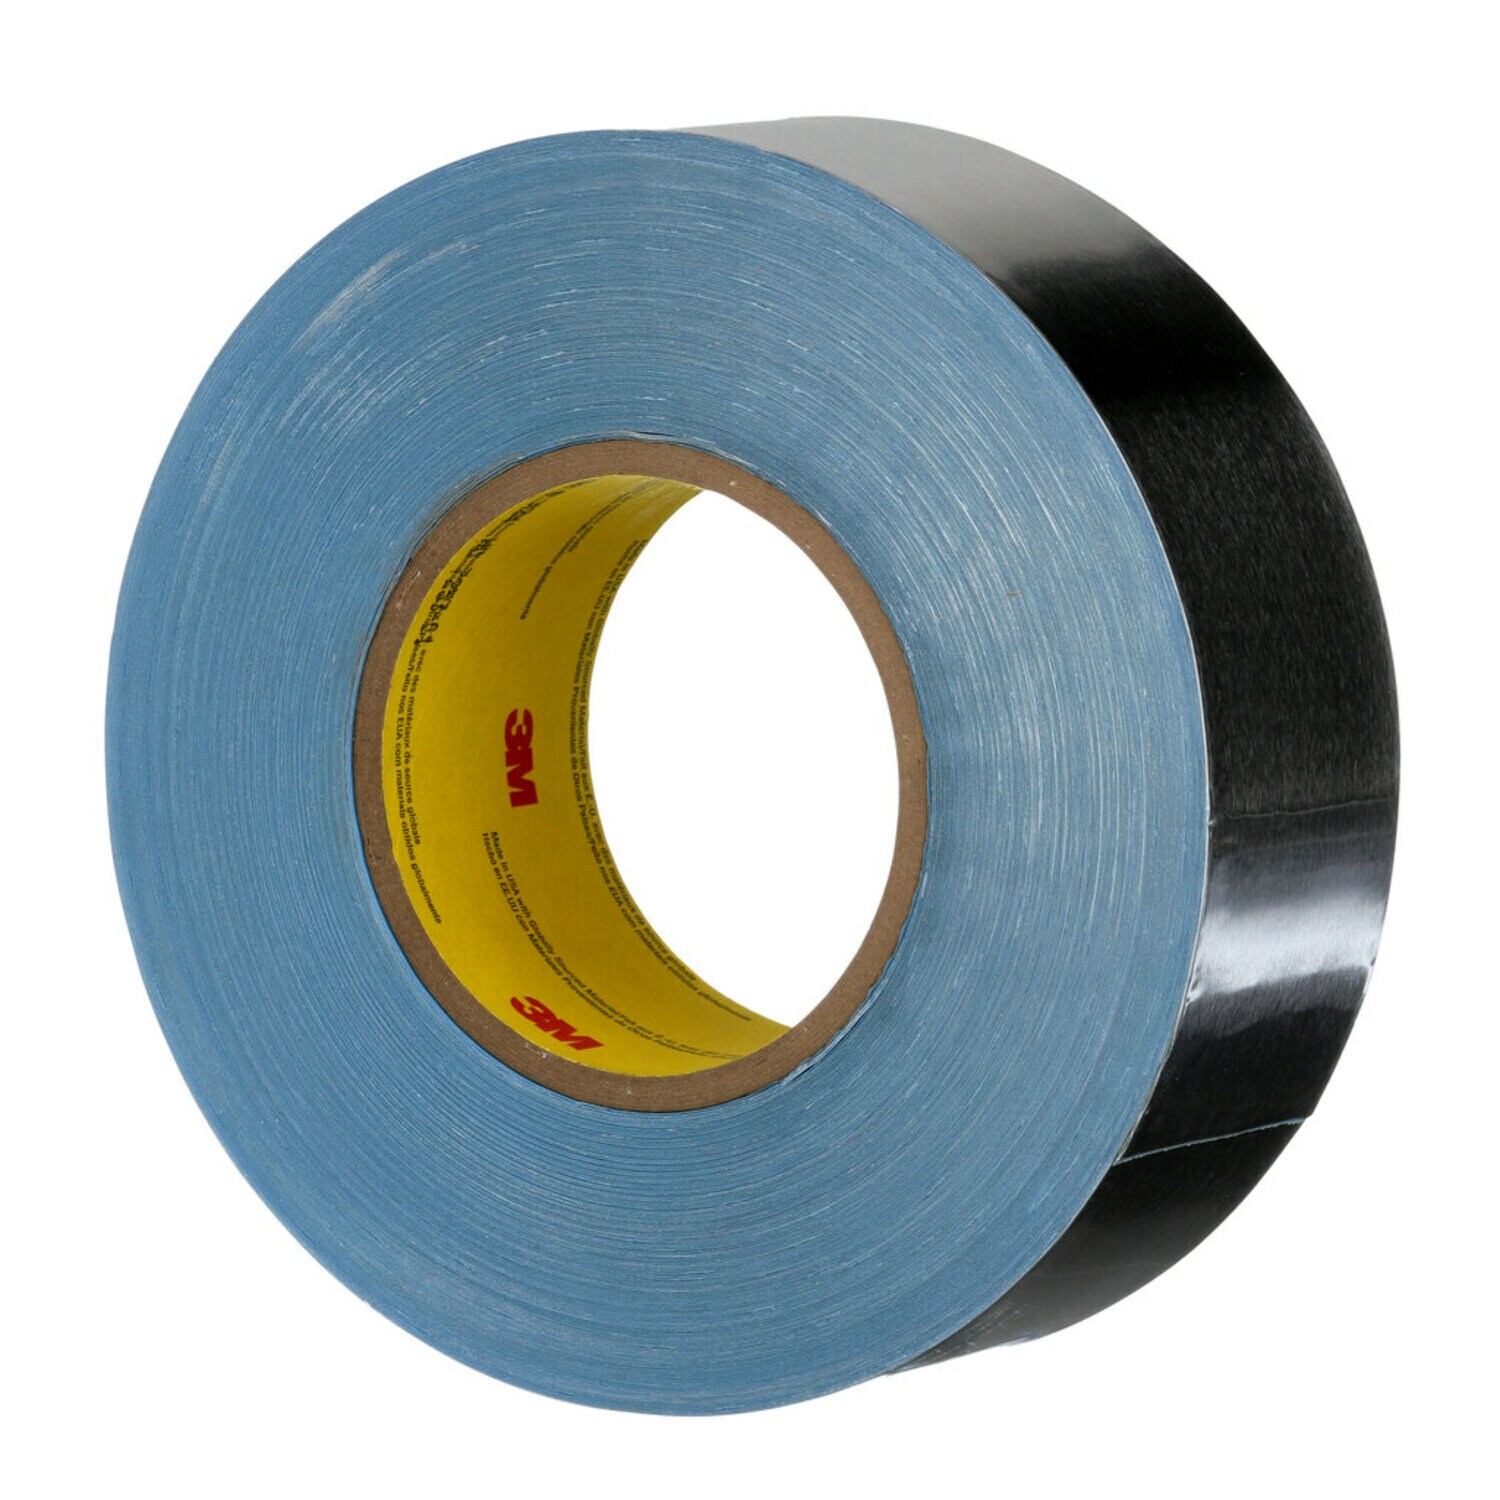 7000049093 - 3M Vibration Damping Tape 434, Silver, 2 in x 60 yd, 7.5 mil, 6 rolls
per case